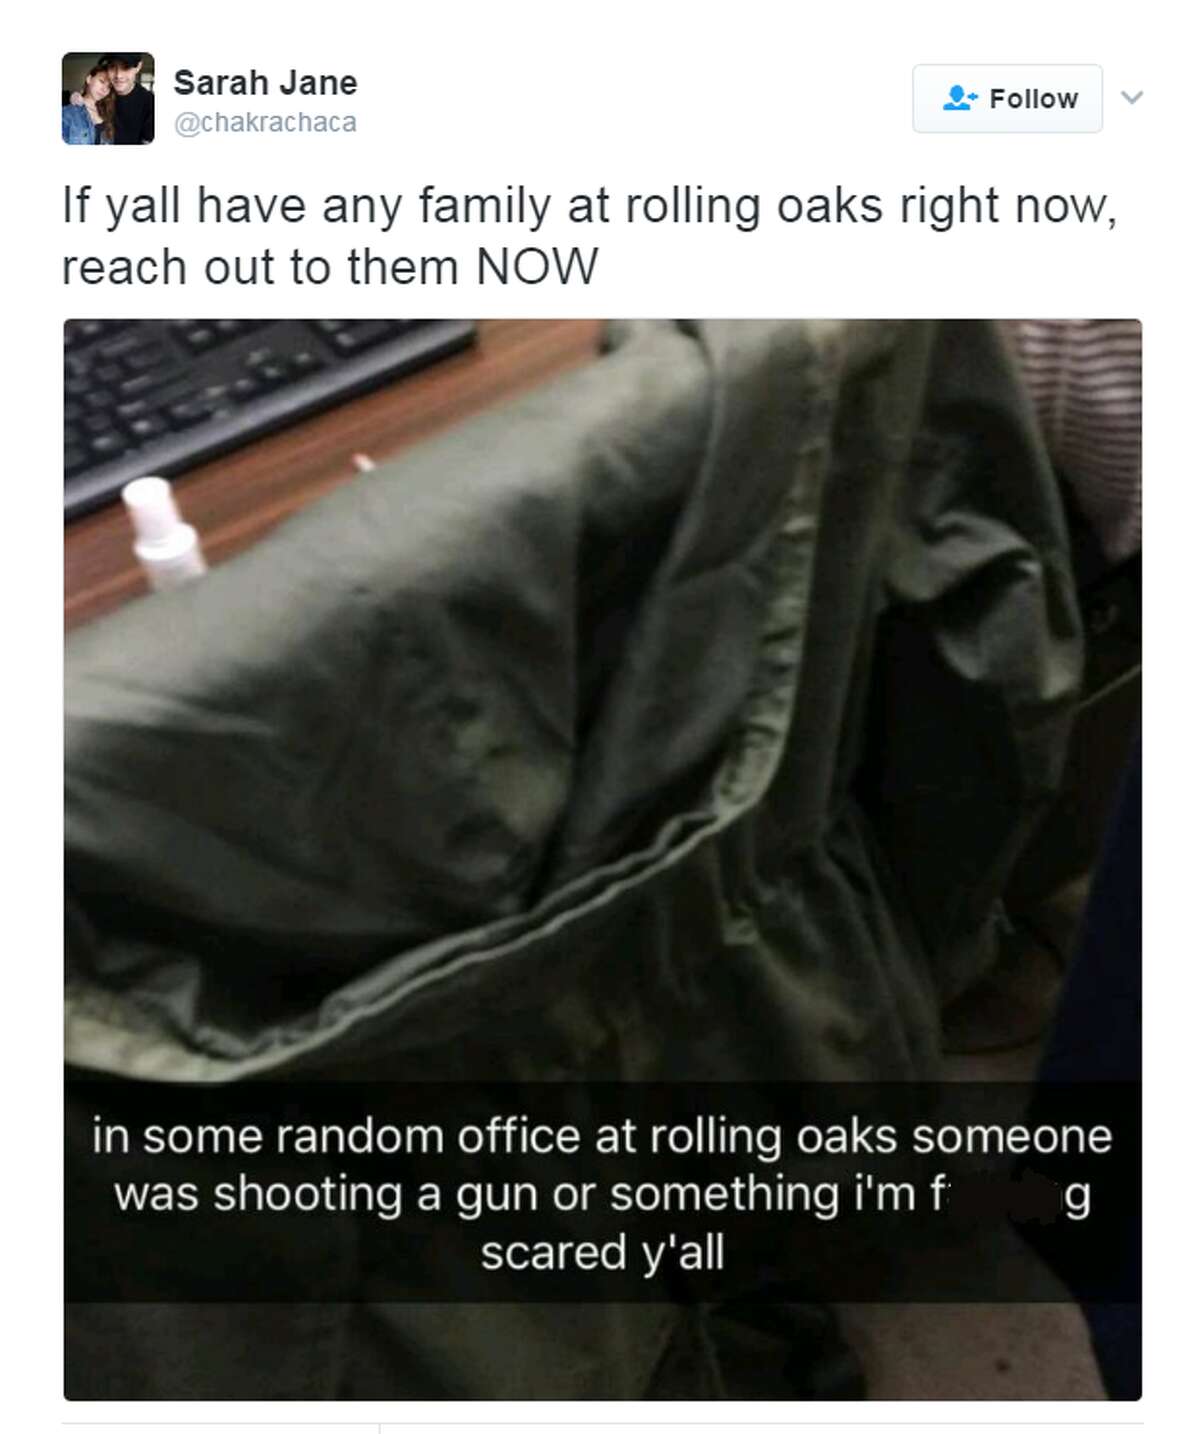 @chakarachaca: i was at rolling oaks mall and there was a shooting, never been so scared, never take life for granted. If yall have any family at rolling oaks right now, reach out to them NOW